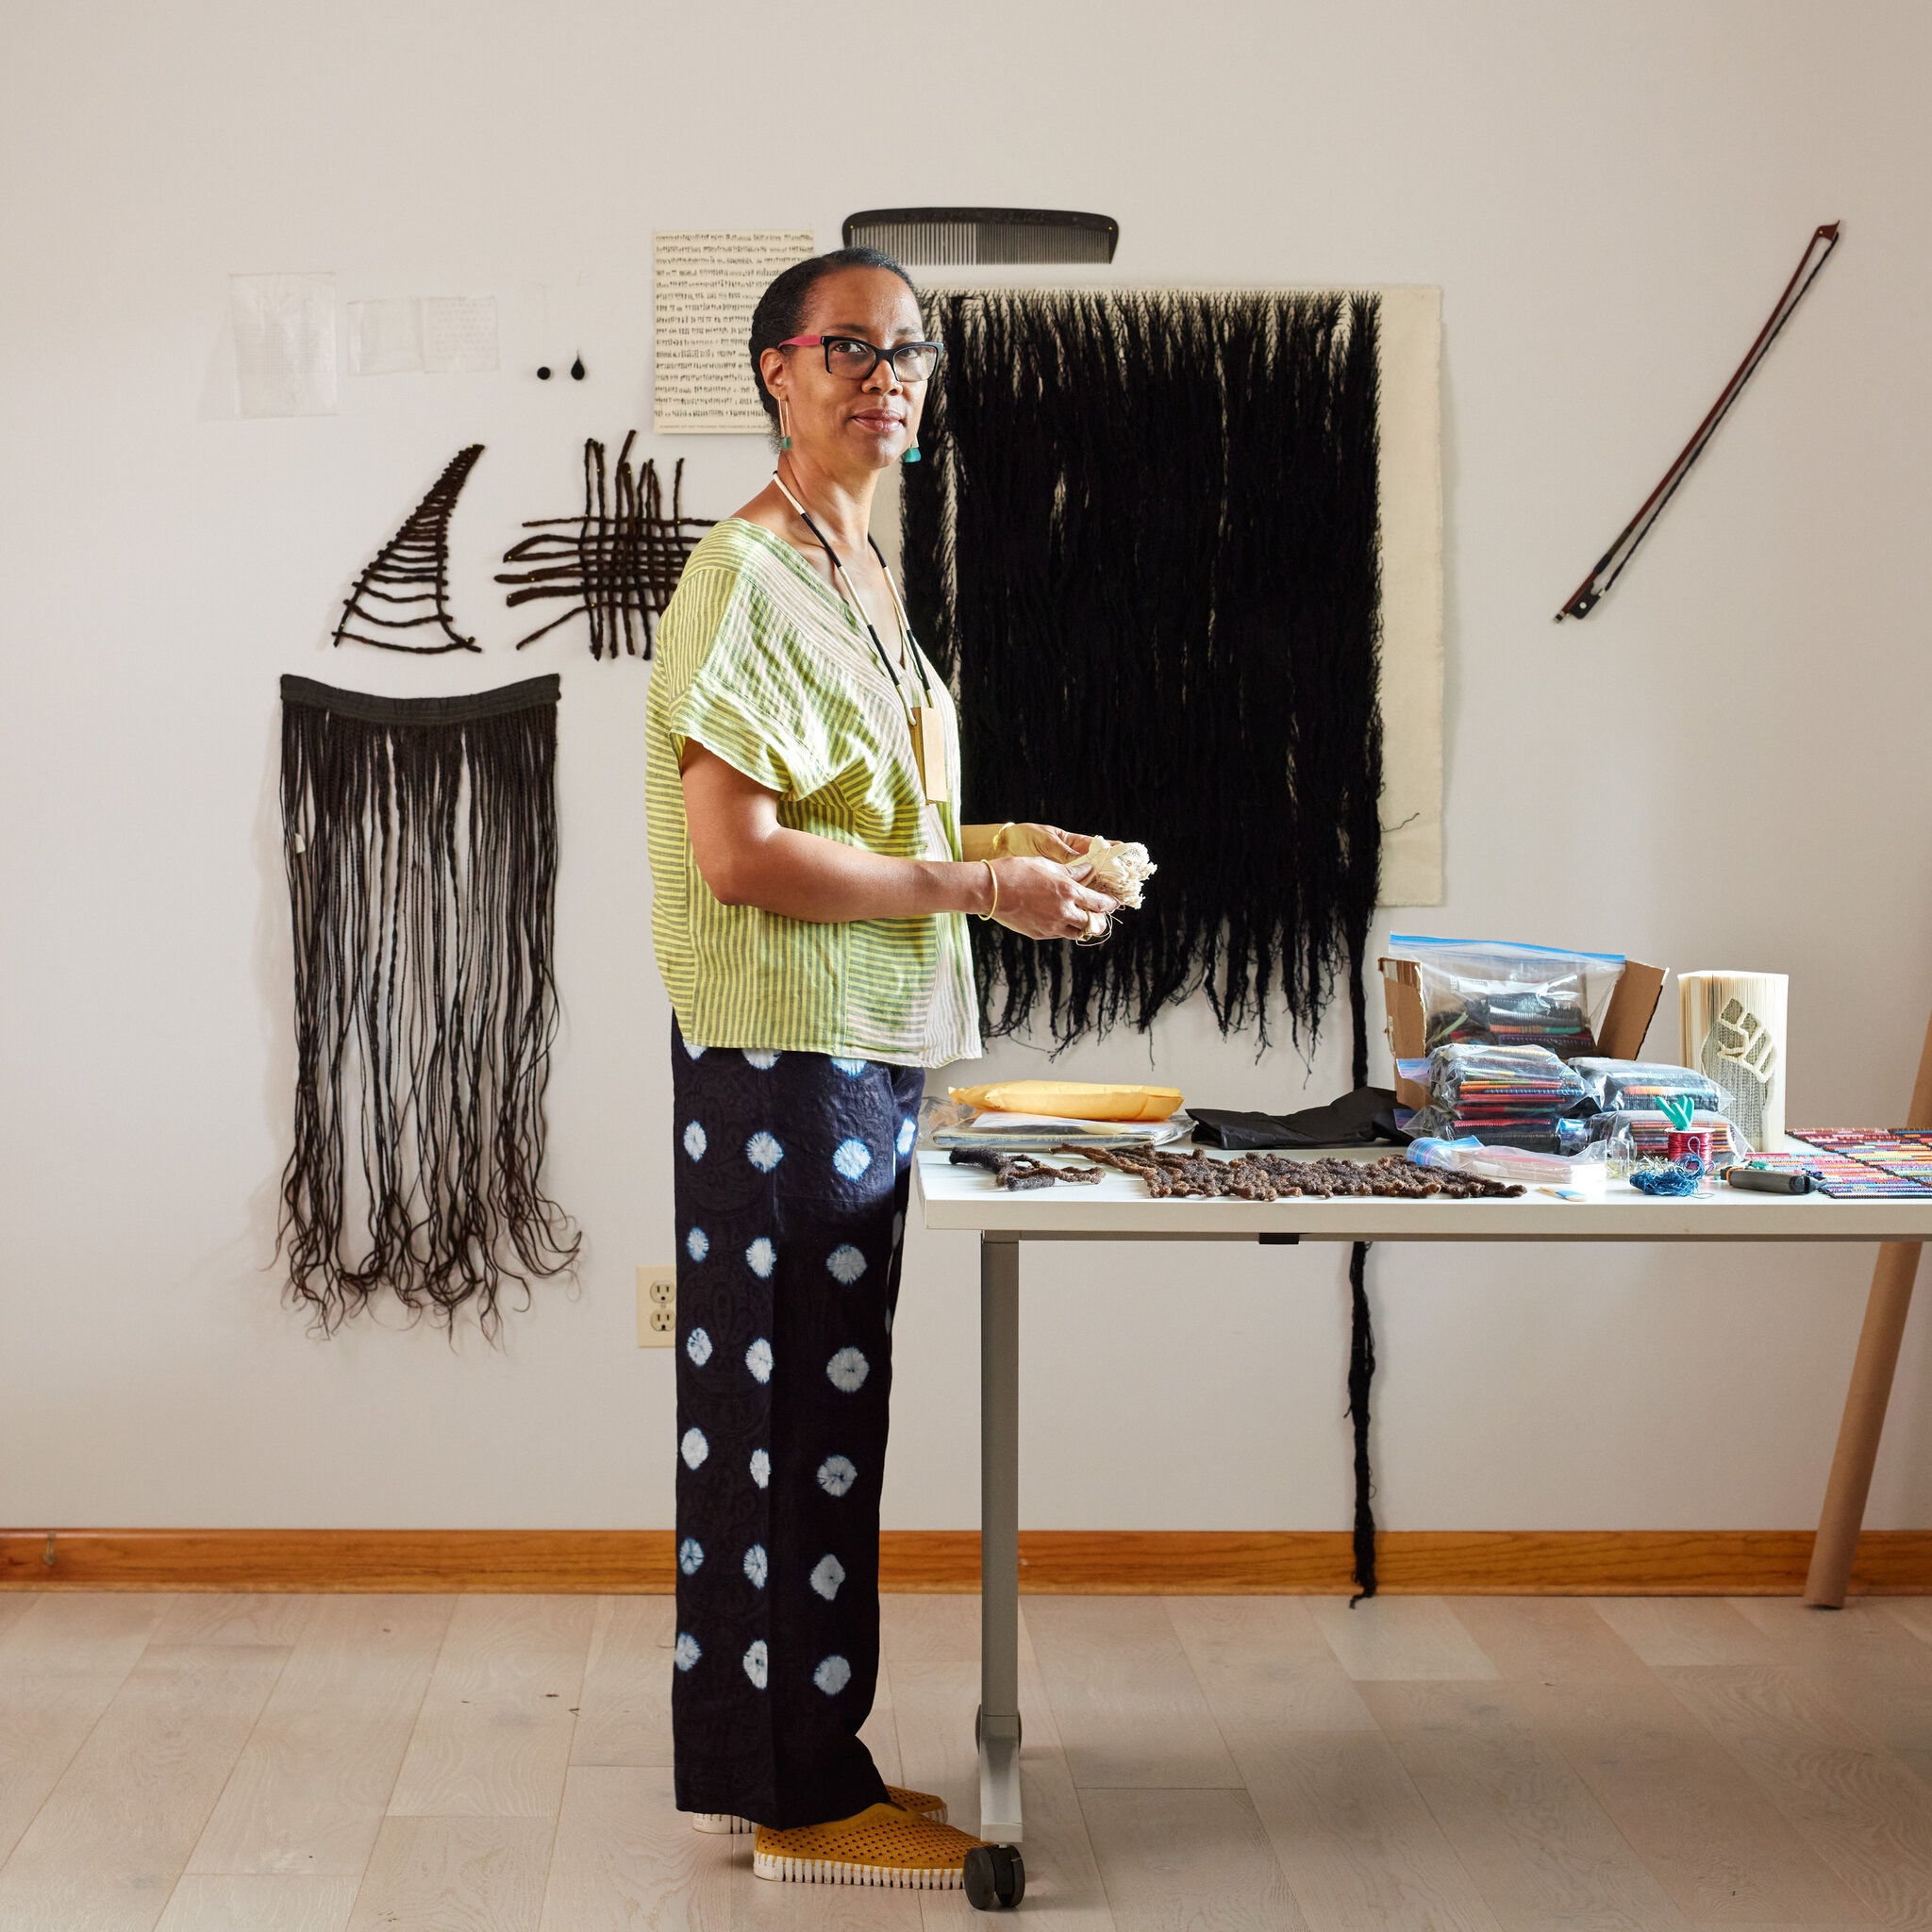 A dark-skinned woman stands facing the right next to a worktable in an art studio. She looks directly at the camera; her hands hold a piece of material in front of her. On the wall behind her is a over-sized comb hung above four distinctly different tapestries comprised of strands of black hair.